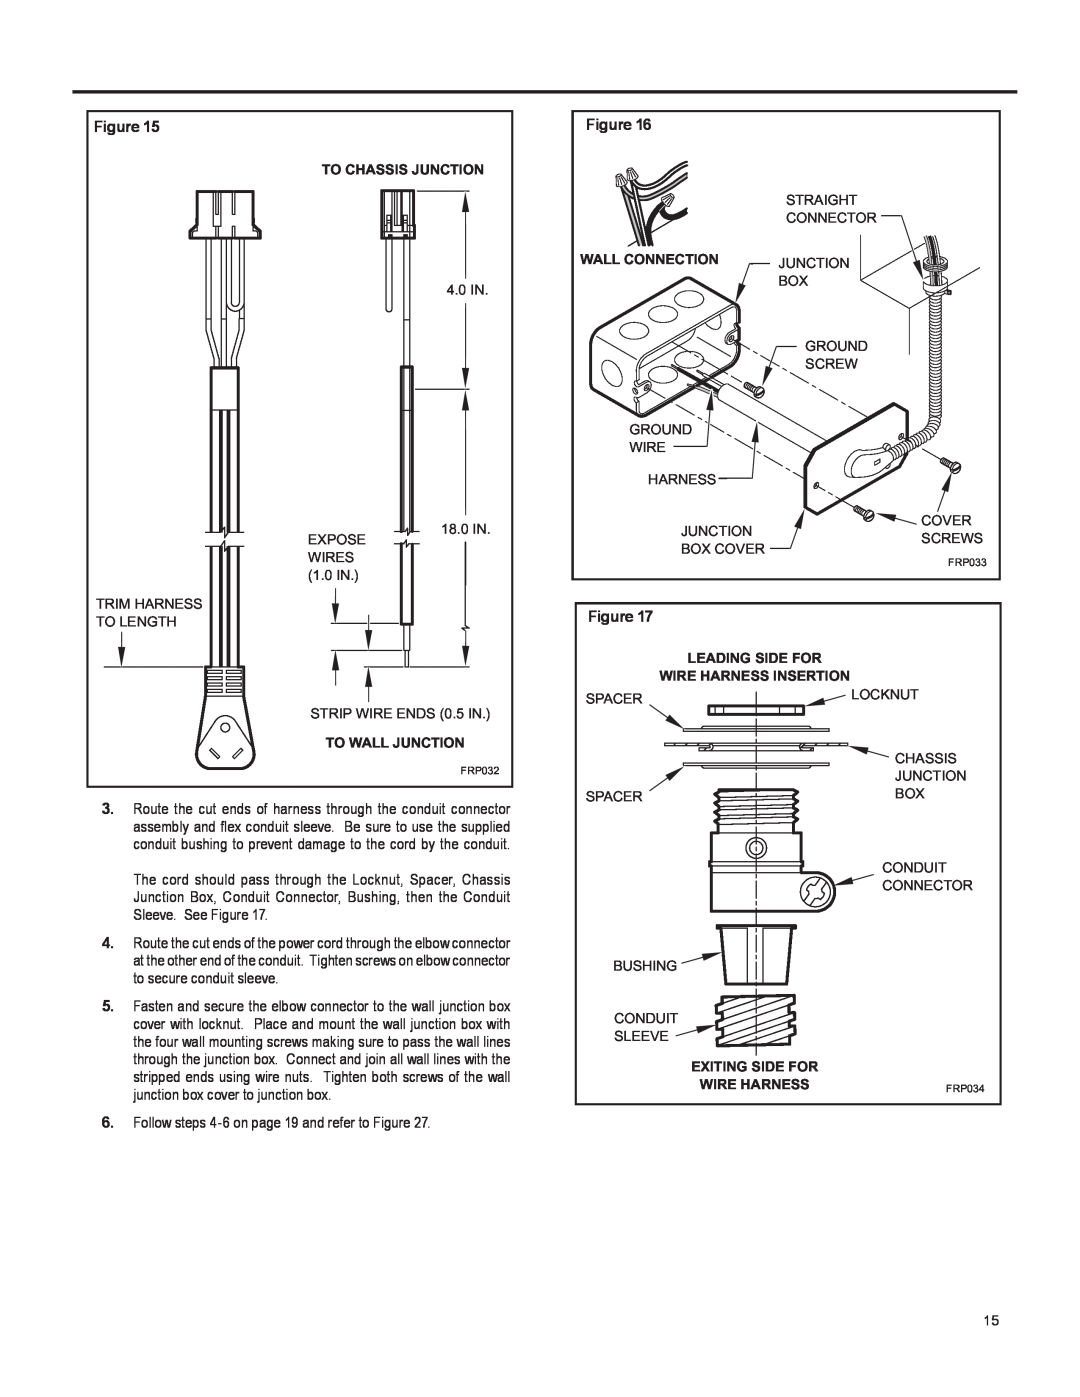 Friedrich 920-087-09 operation manual Follow steps 4-6on page 19 and refer to Figure 